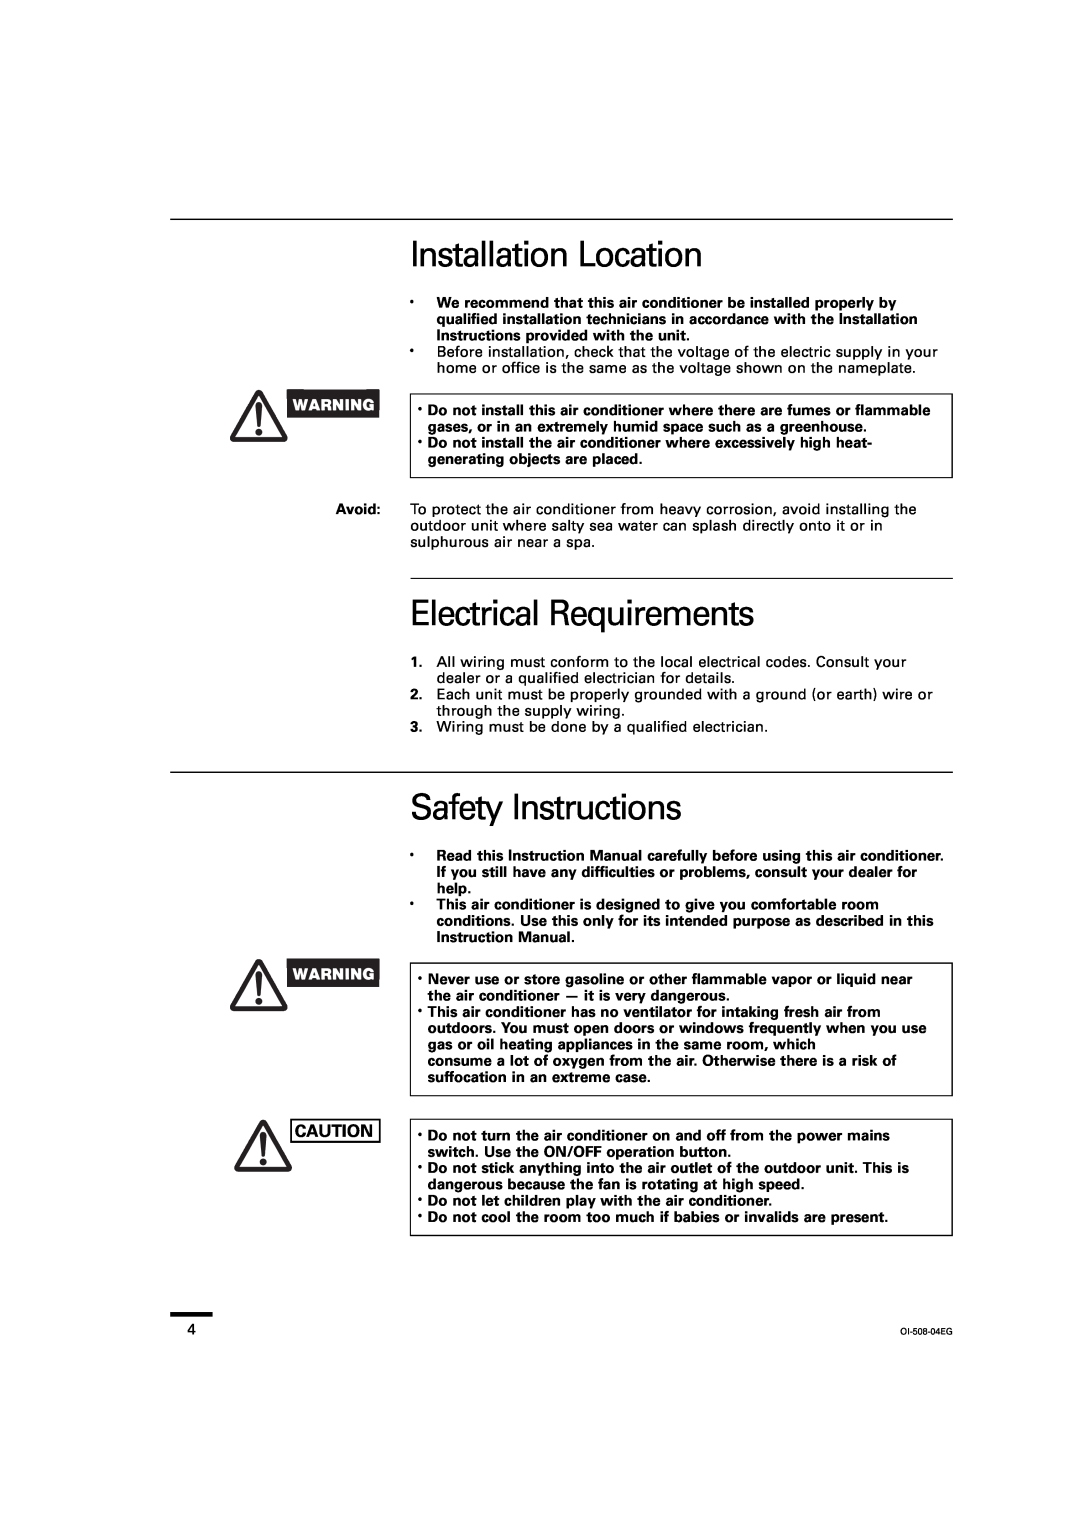 Sanyo KS2462R instruction manual Installation Location, Electrical Requirements, Safety Instructions 